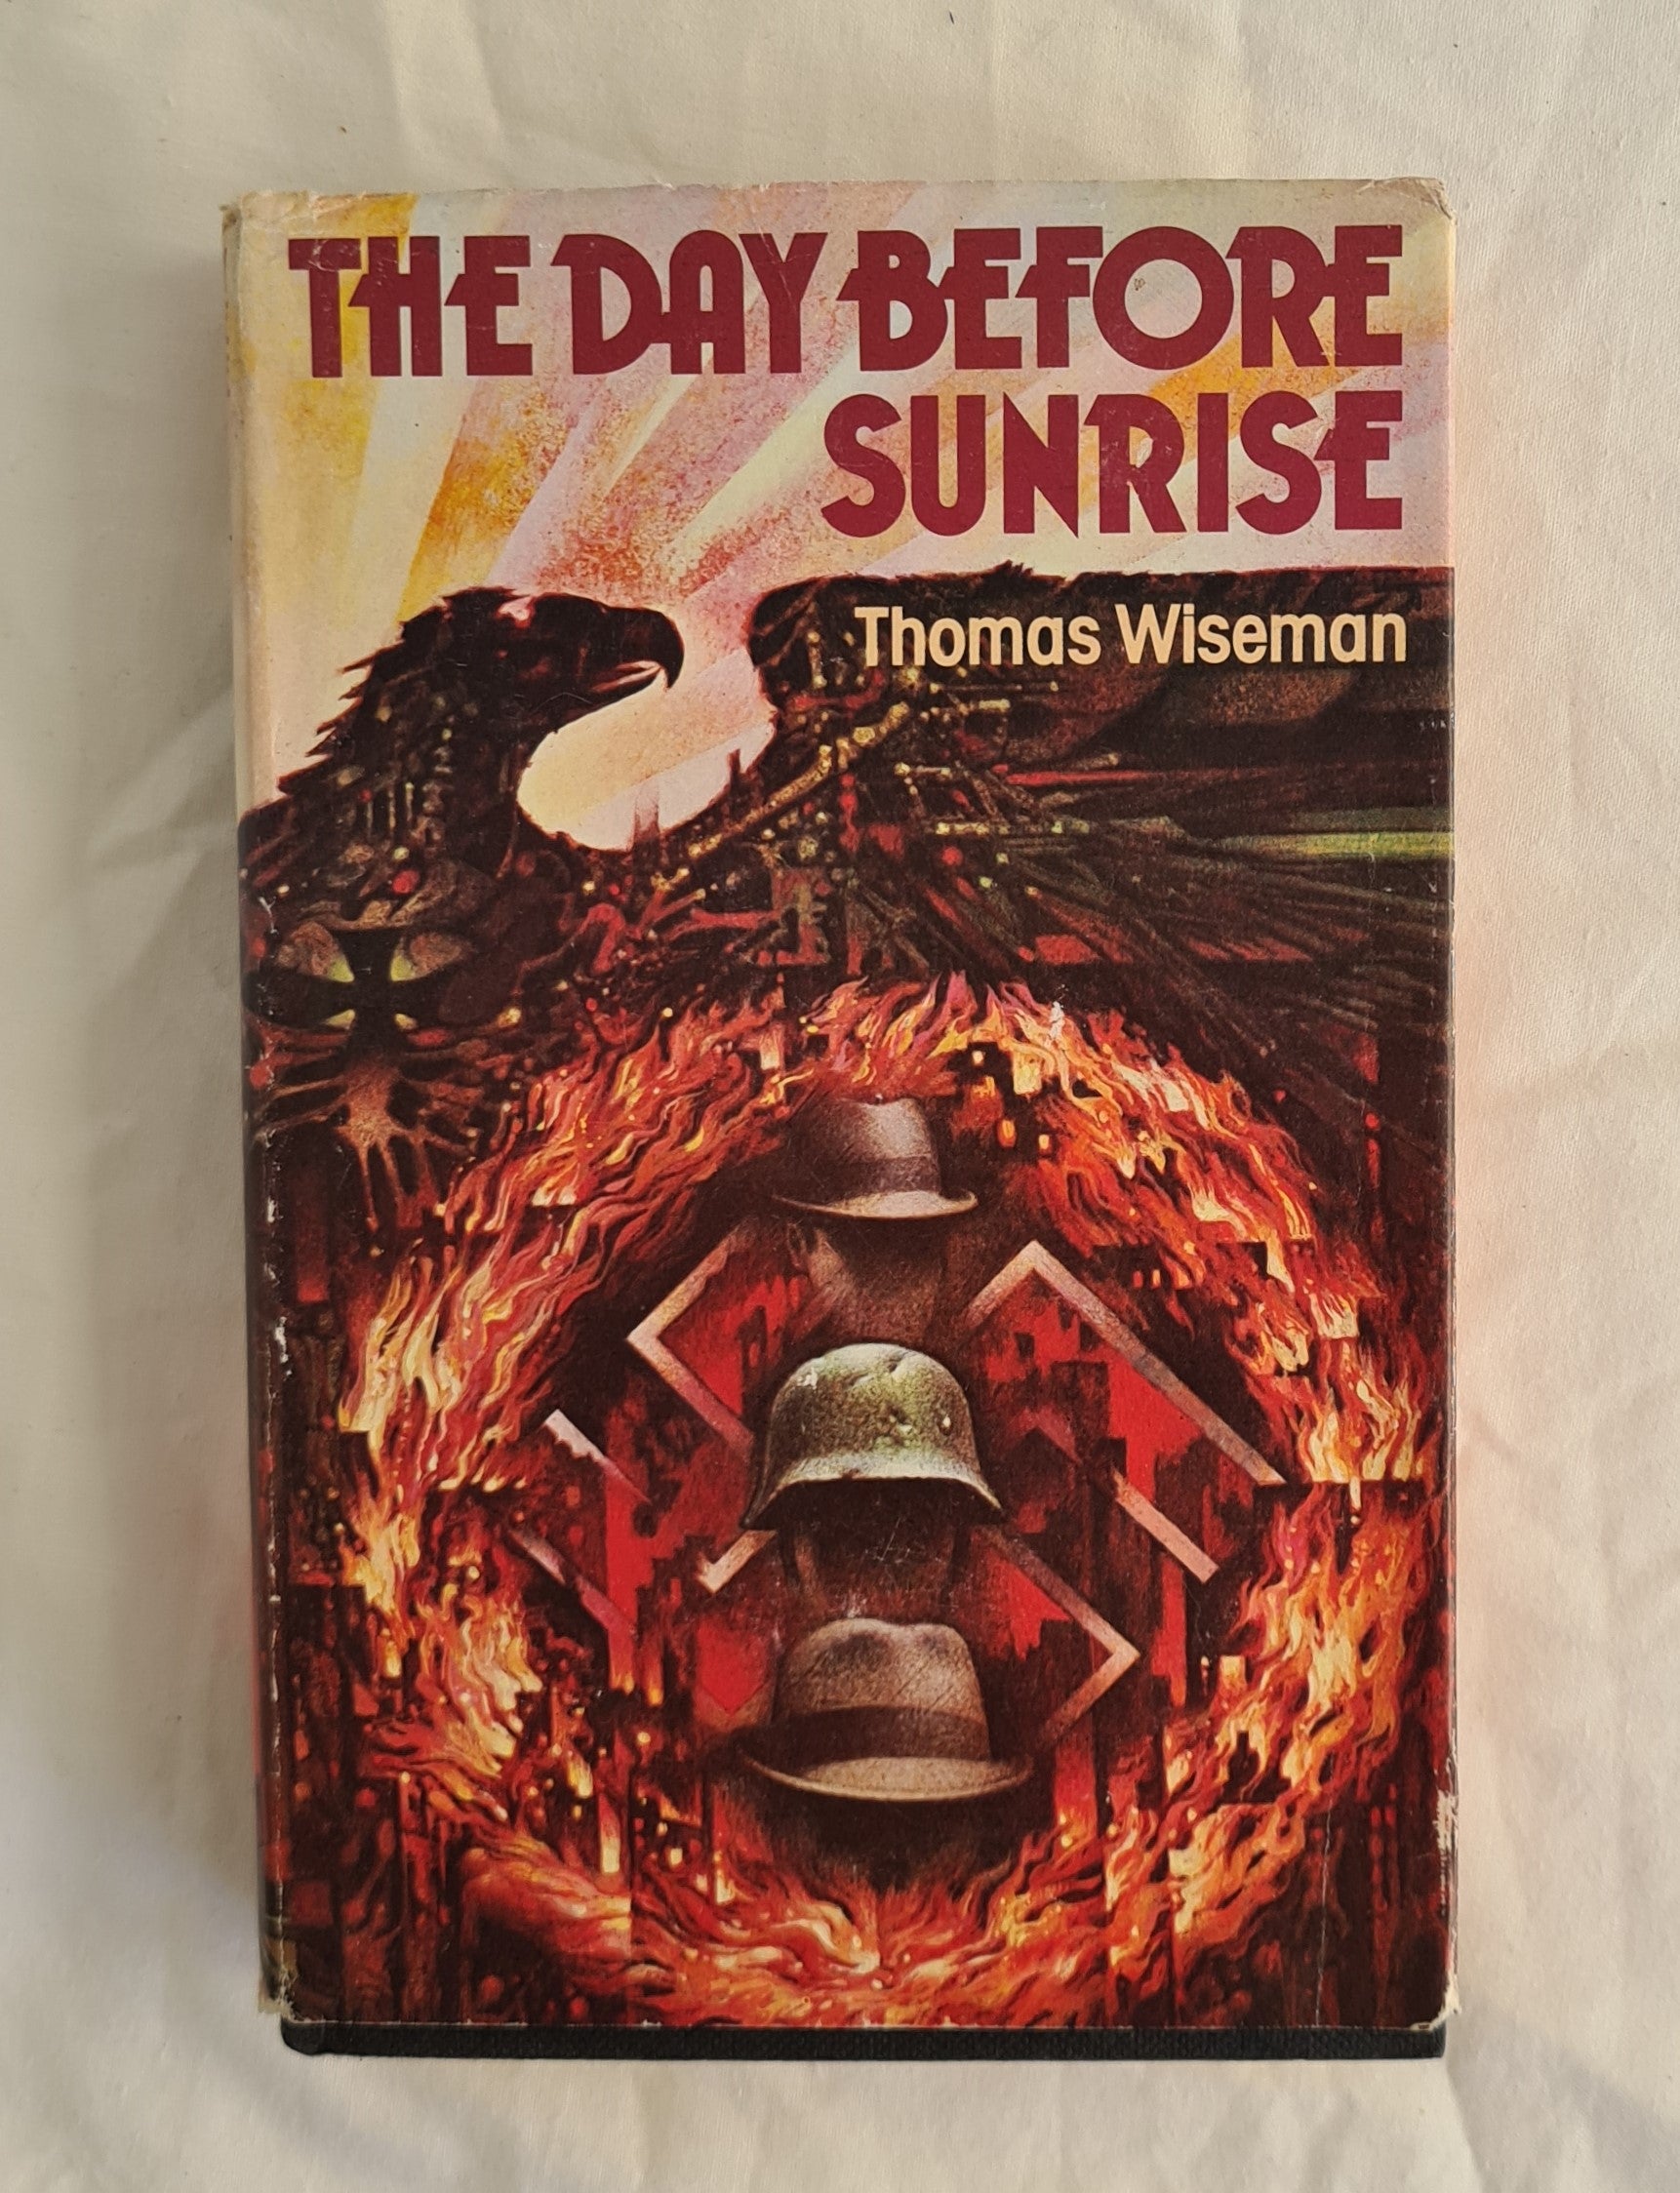 The Day Before Sunrise  by Thomas Wiseman